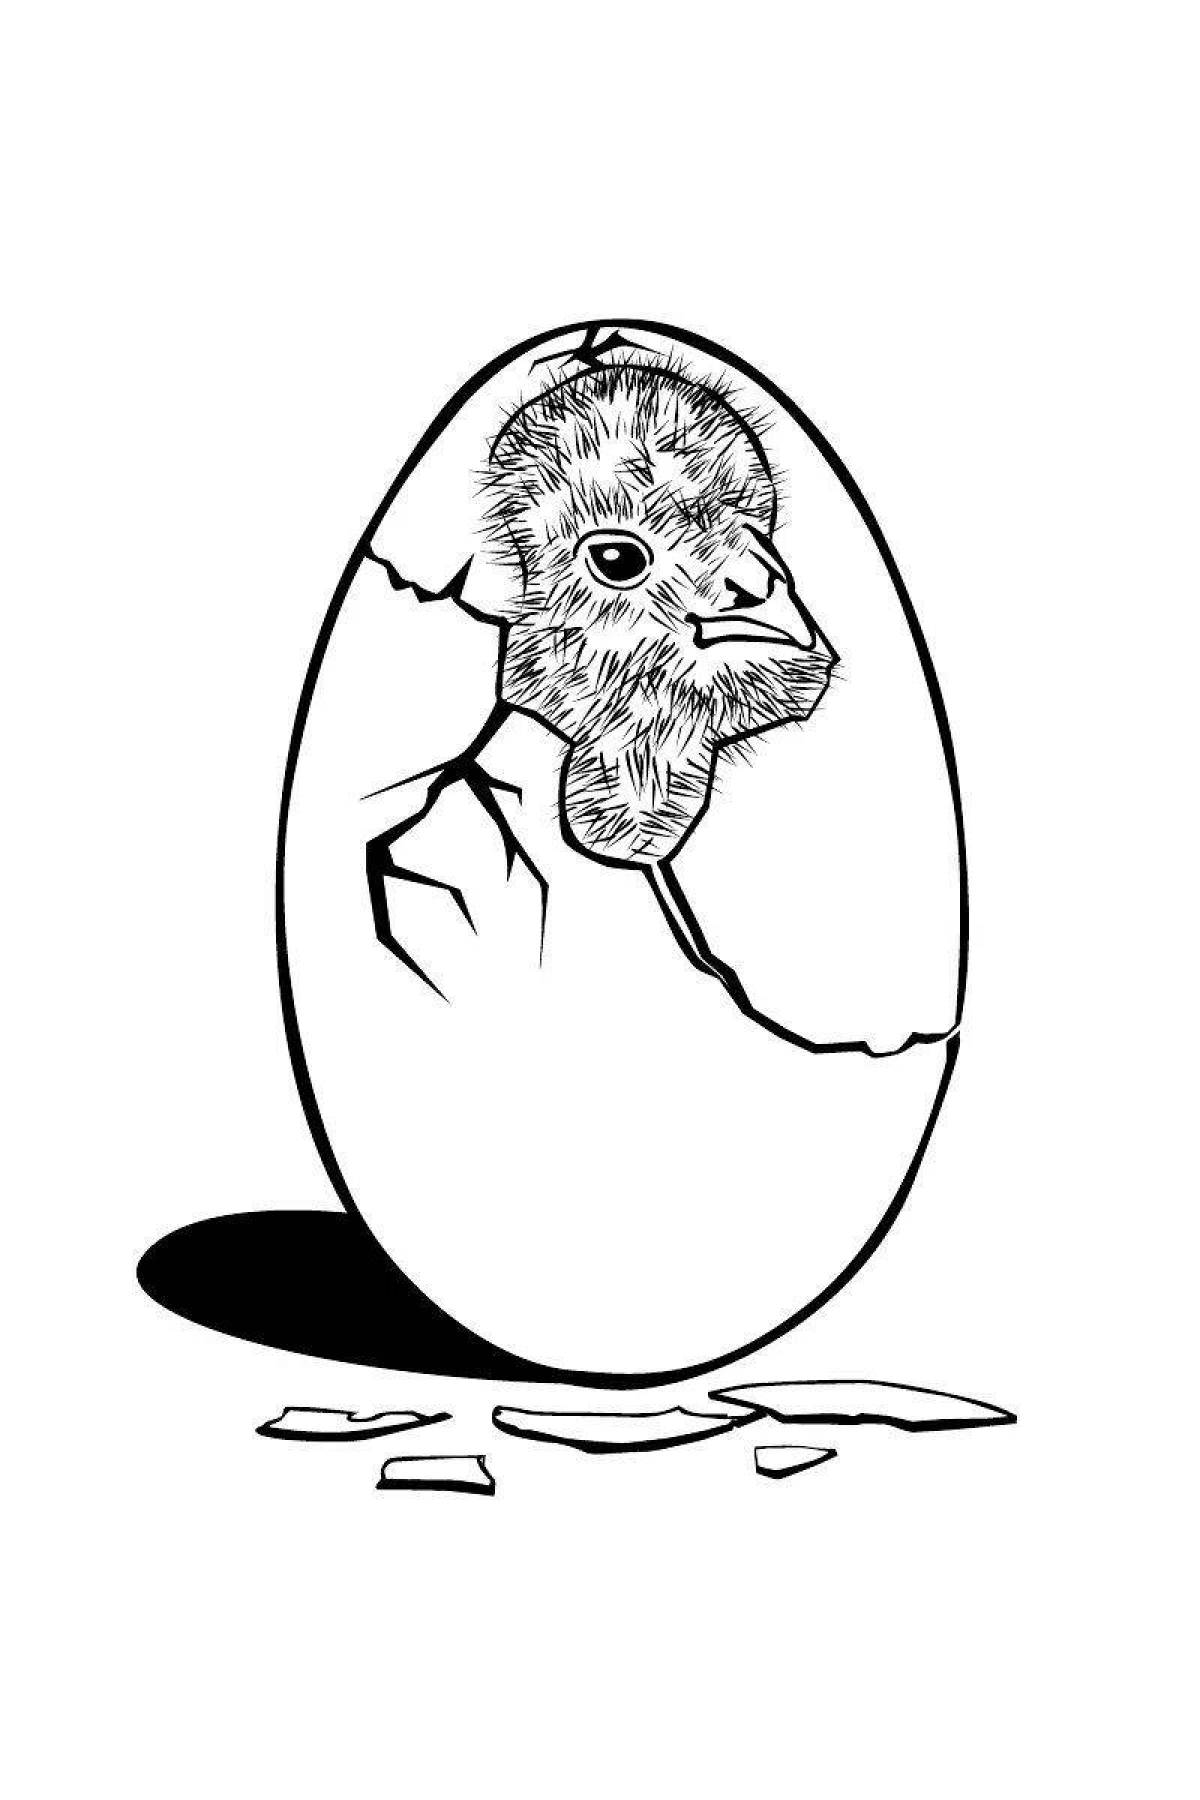 Coloring page magic chick in egg